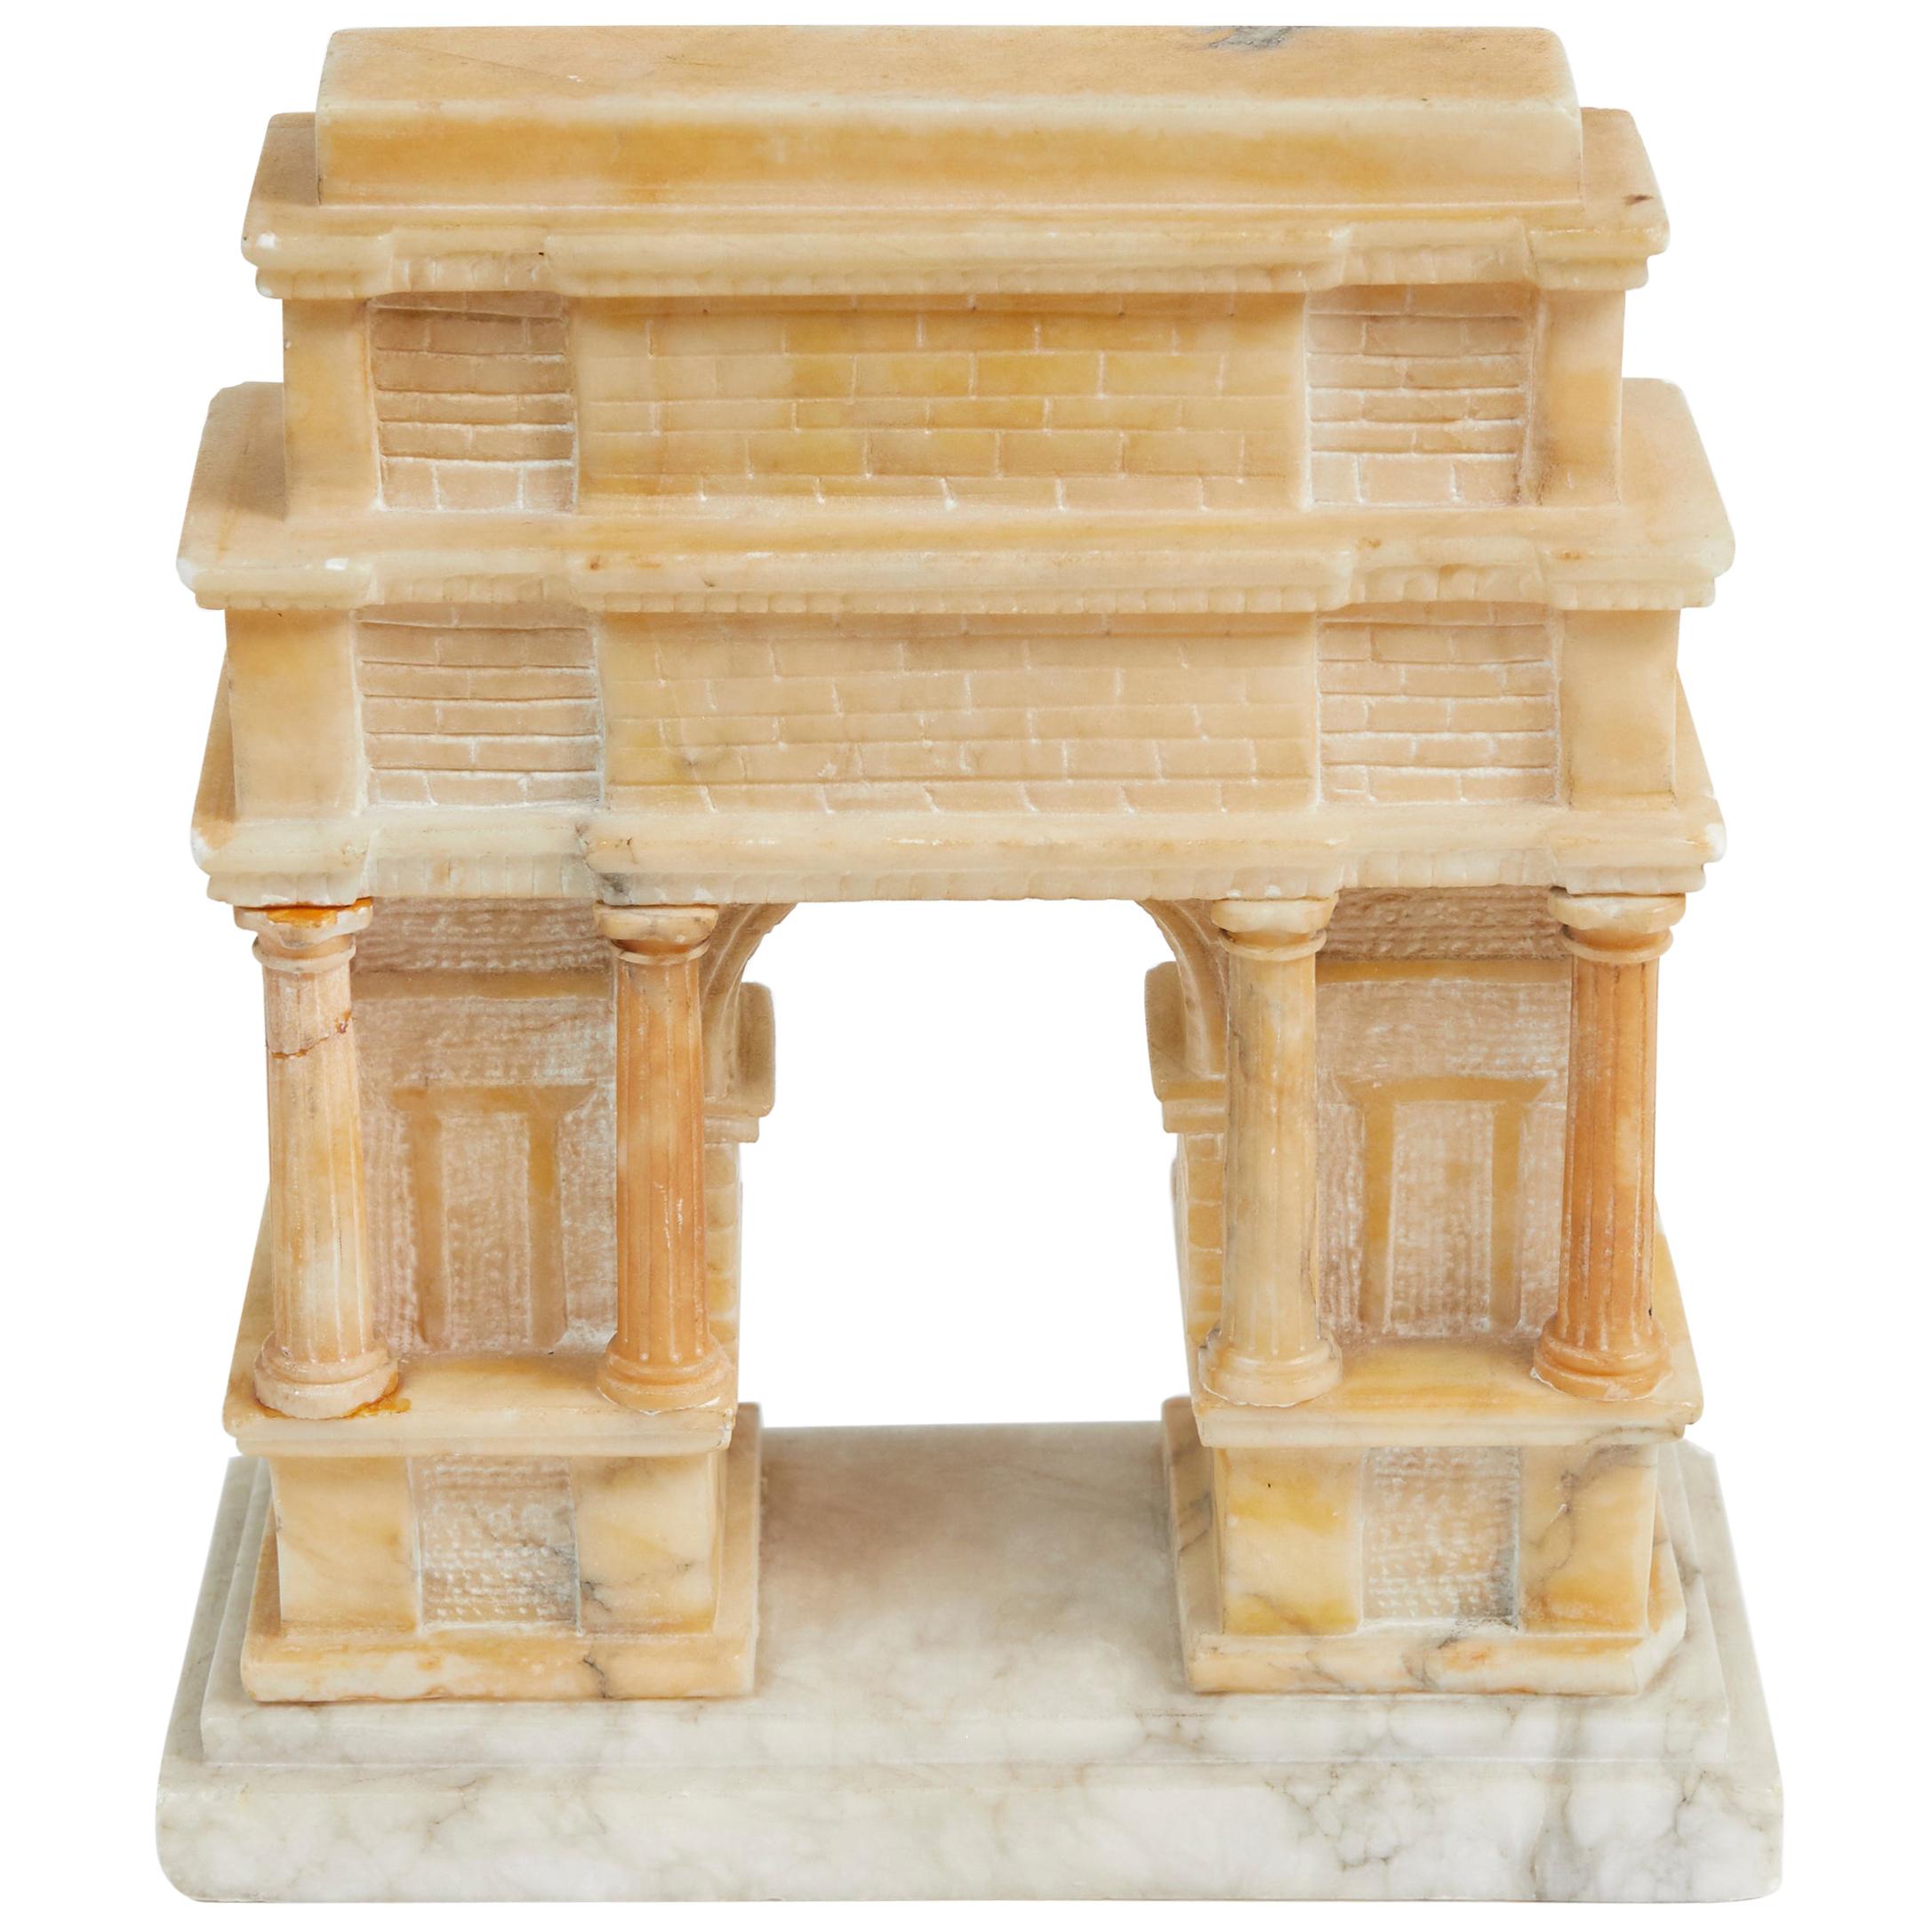 19th Century Carved Alabaster Grand Tour Model of Titus Arch in Rome